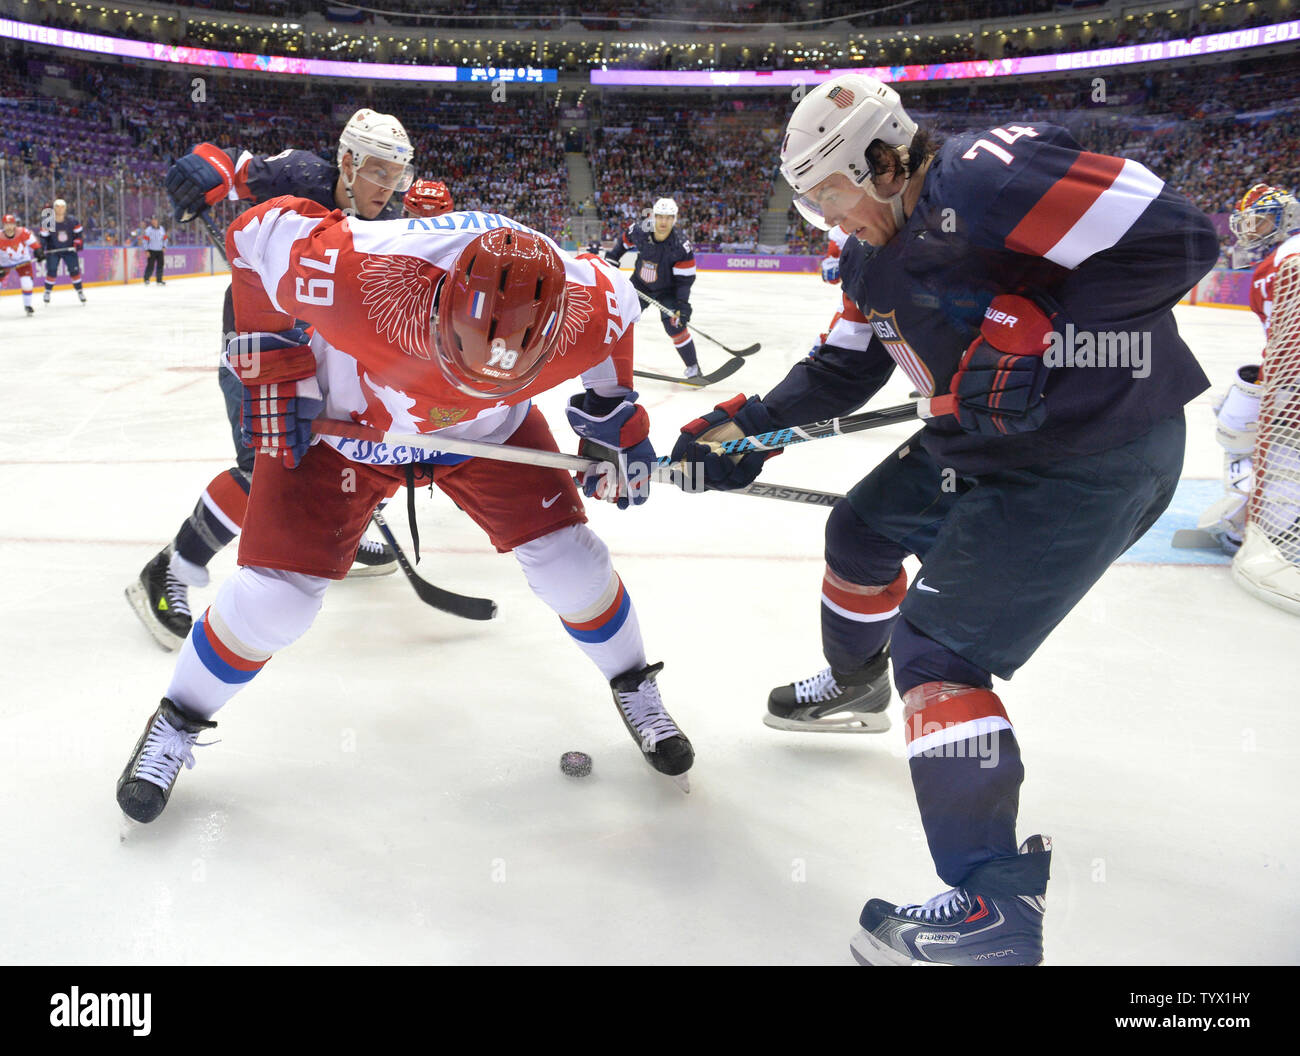 Russia's Andrei Markov frights for the puck with USA's T.J. Oshie in the second period of their preliminary round game at the Sochi 2014 Winter Olympics on February 15, 2014 in Sochi, Russia. UPI/Kevin Dietsch Stock Photo